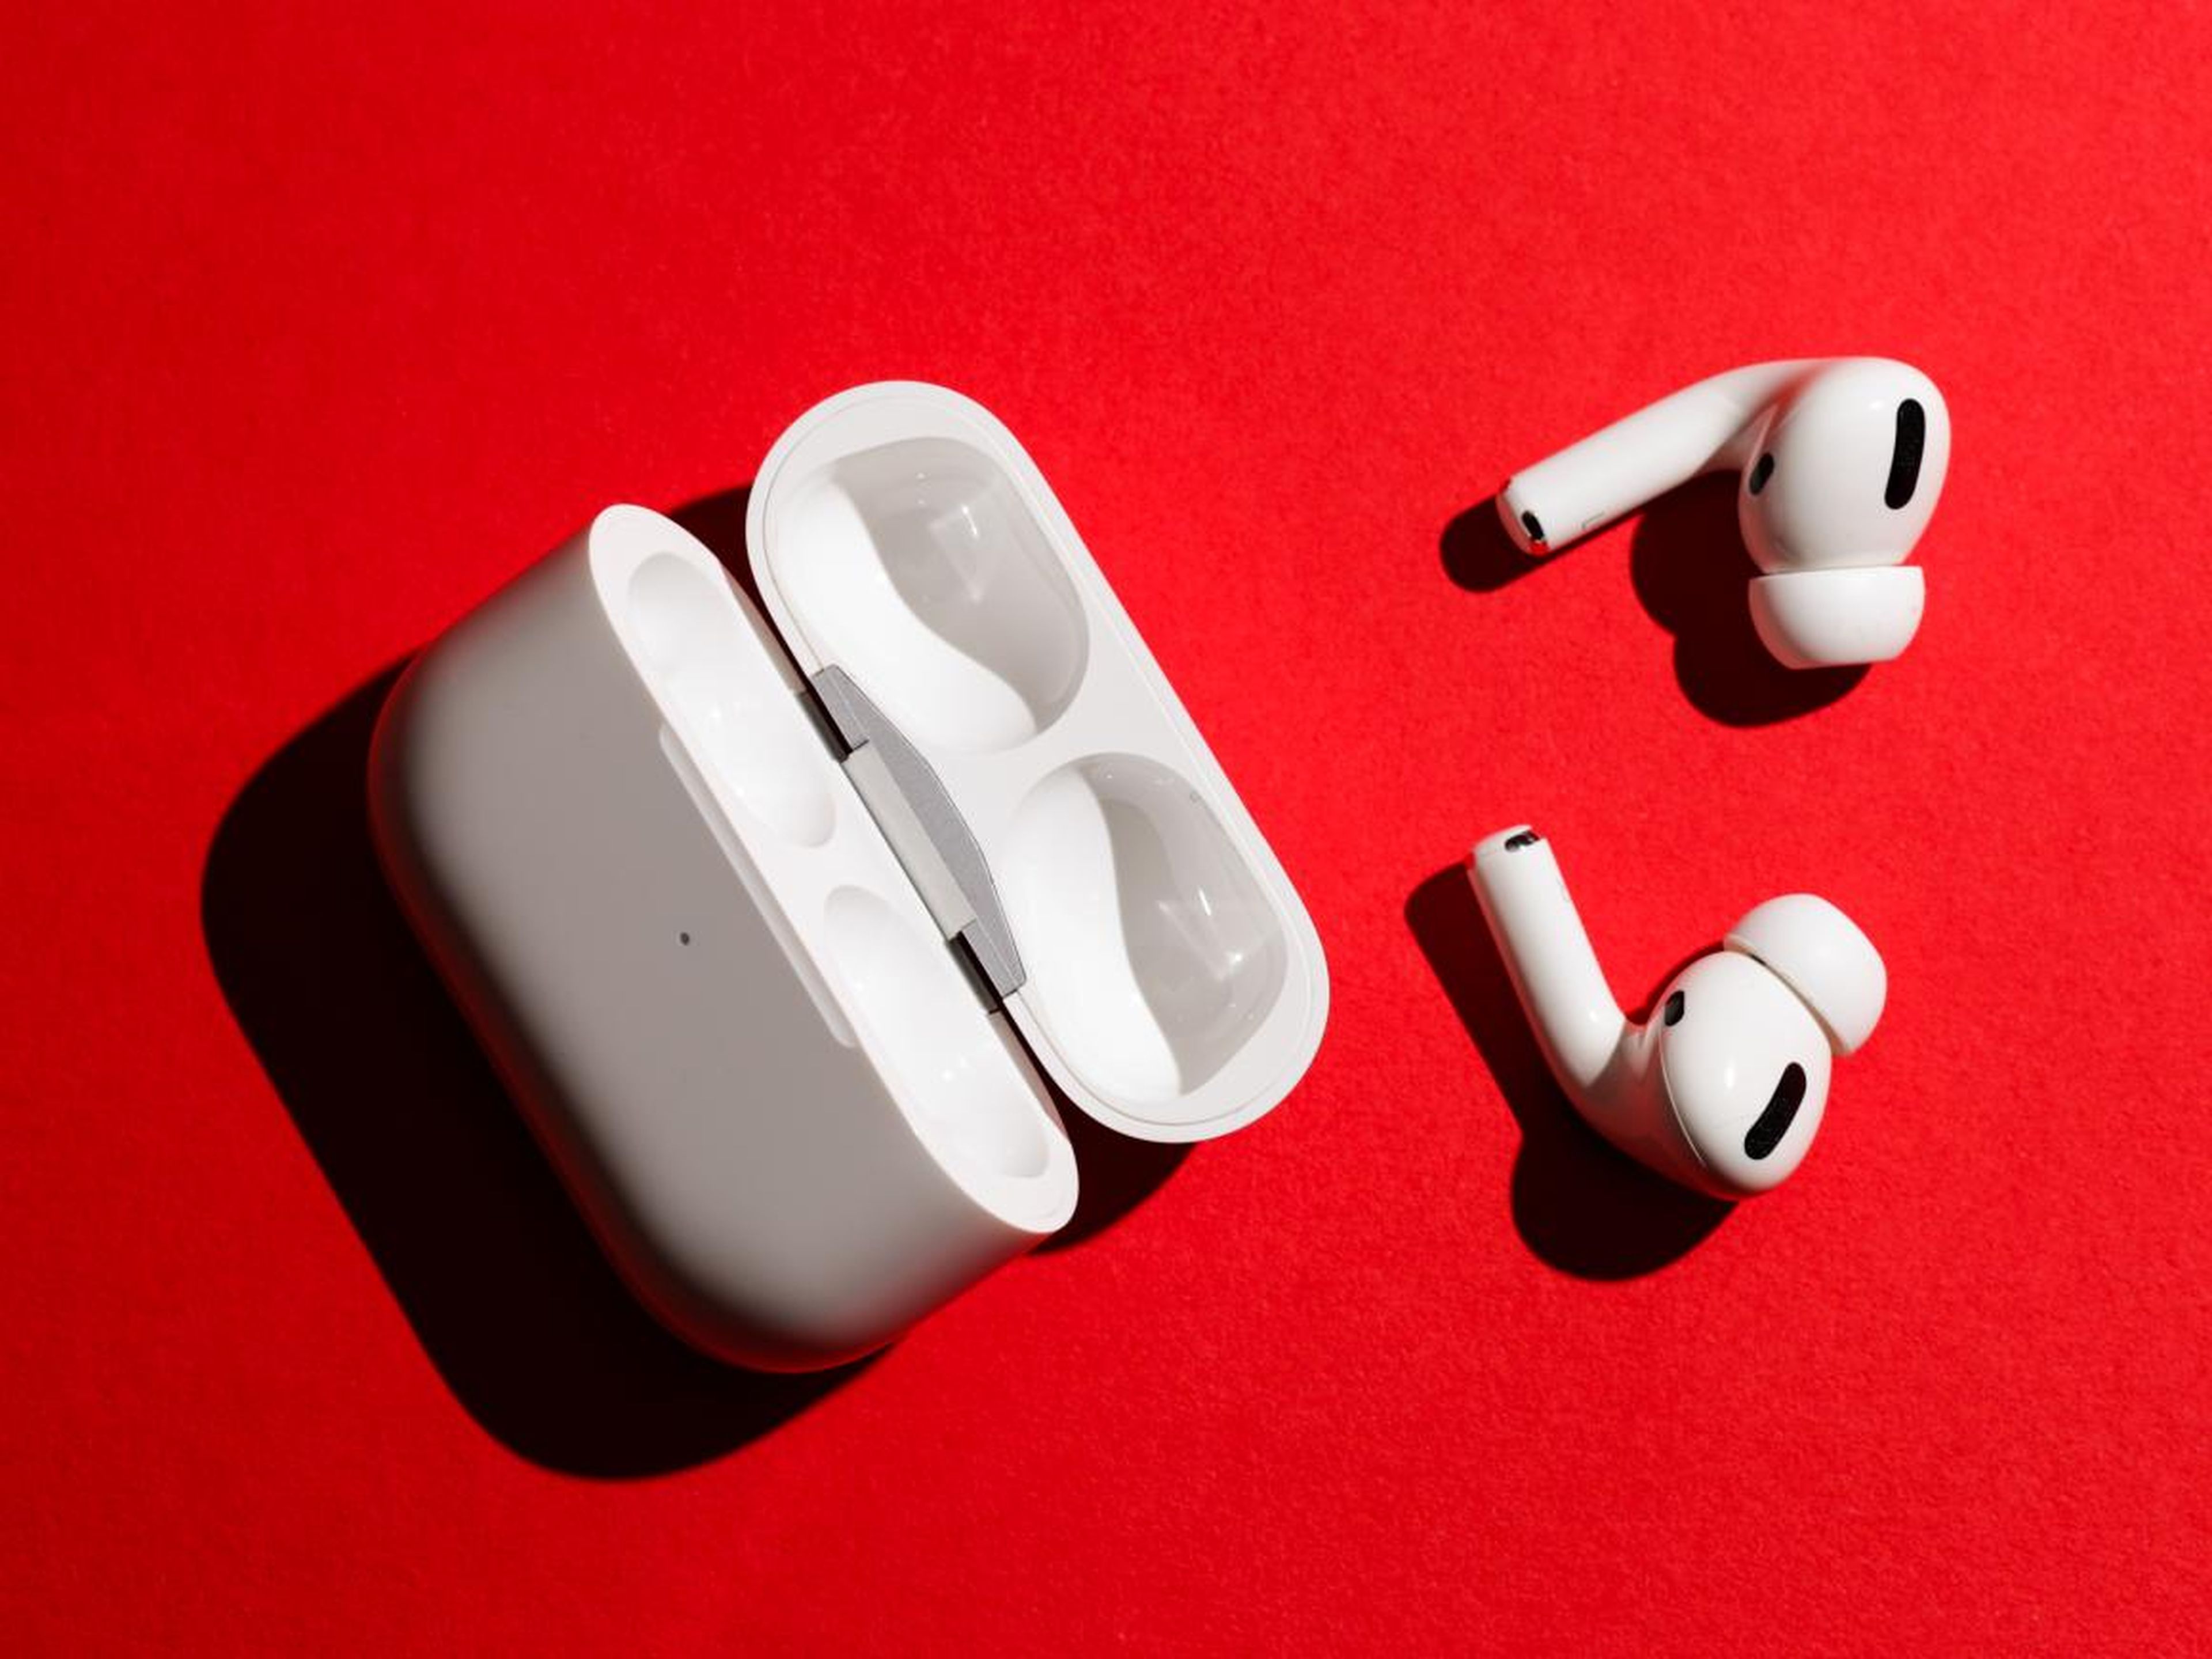 AirPods are likely to continue being a massive success for Apple, strengthening the company's position at the head of the wearables market.